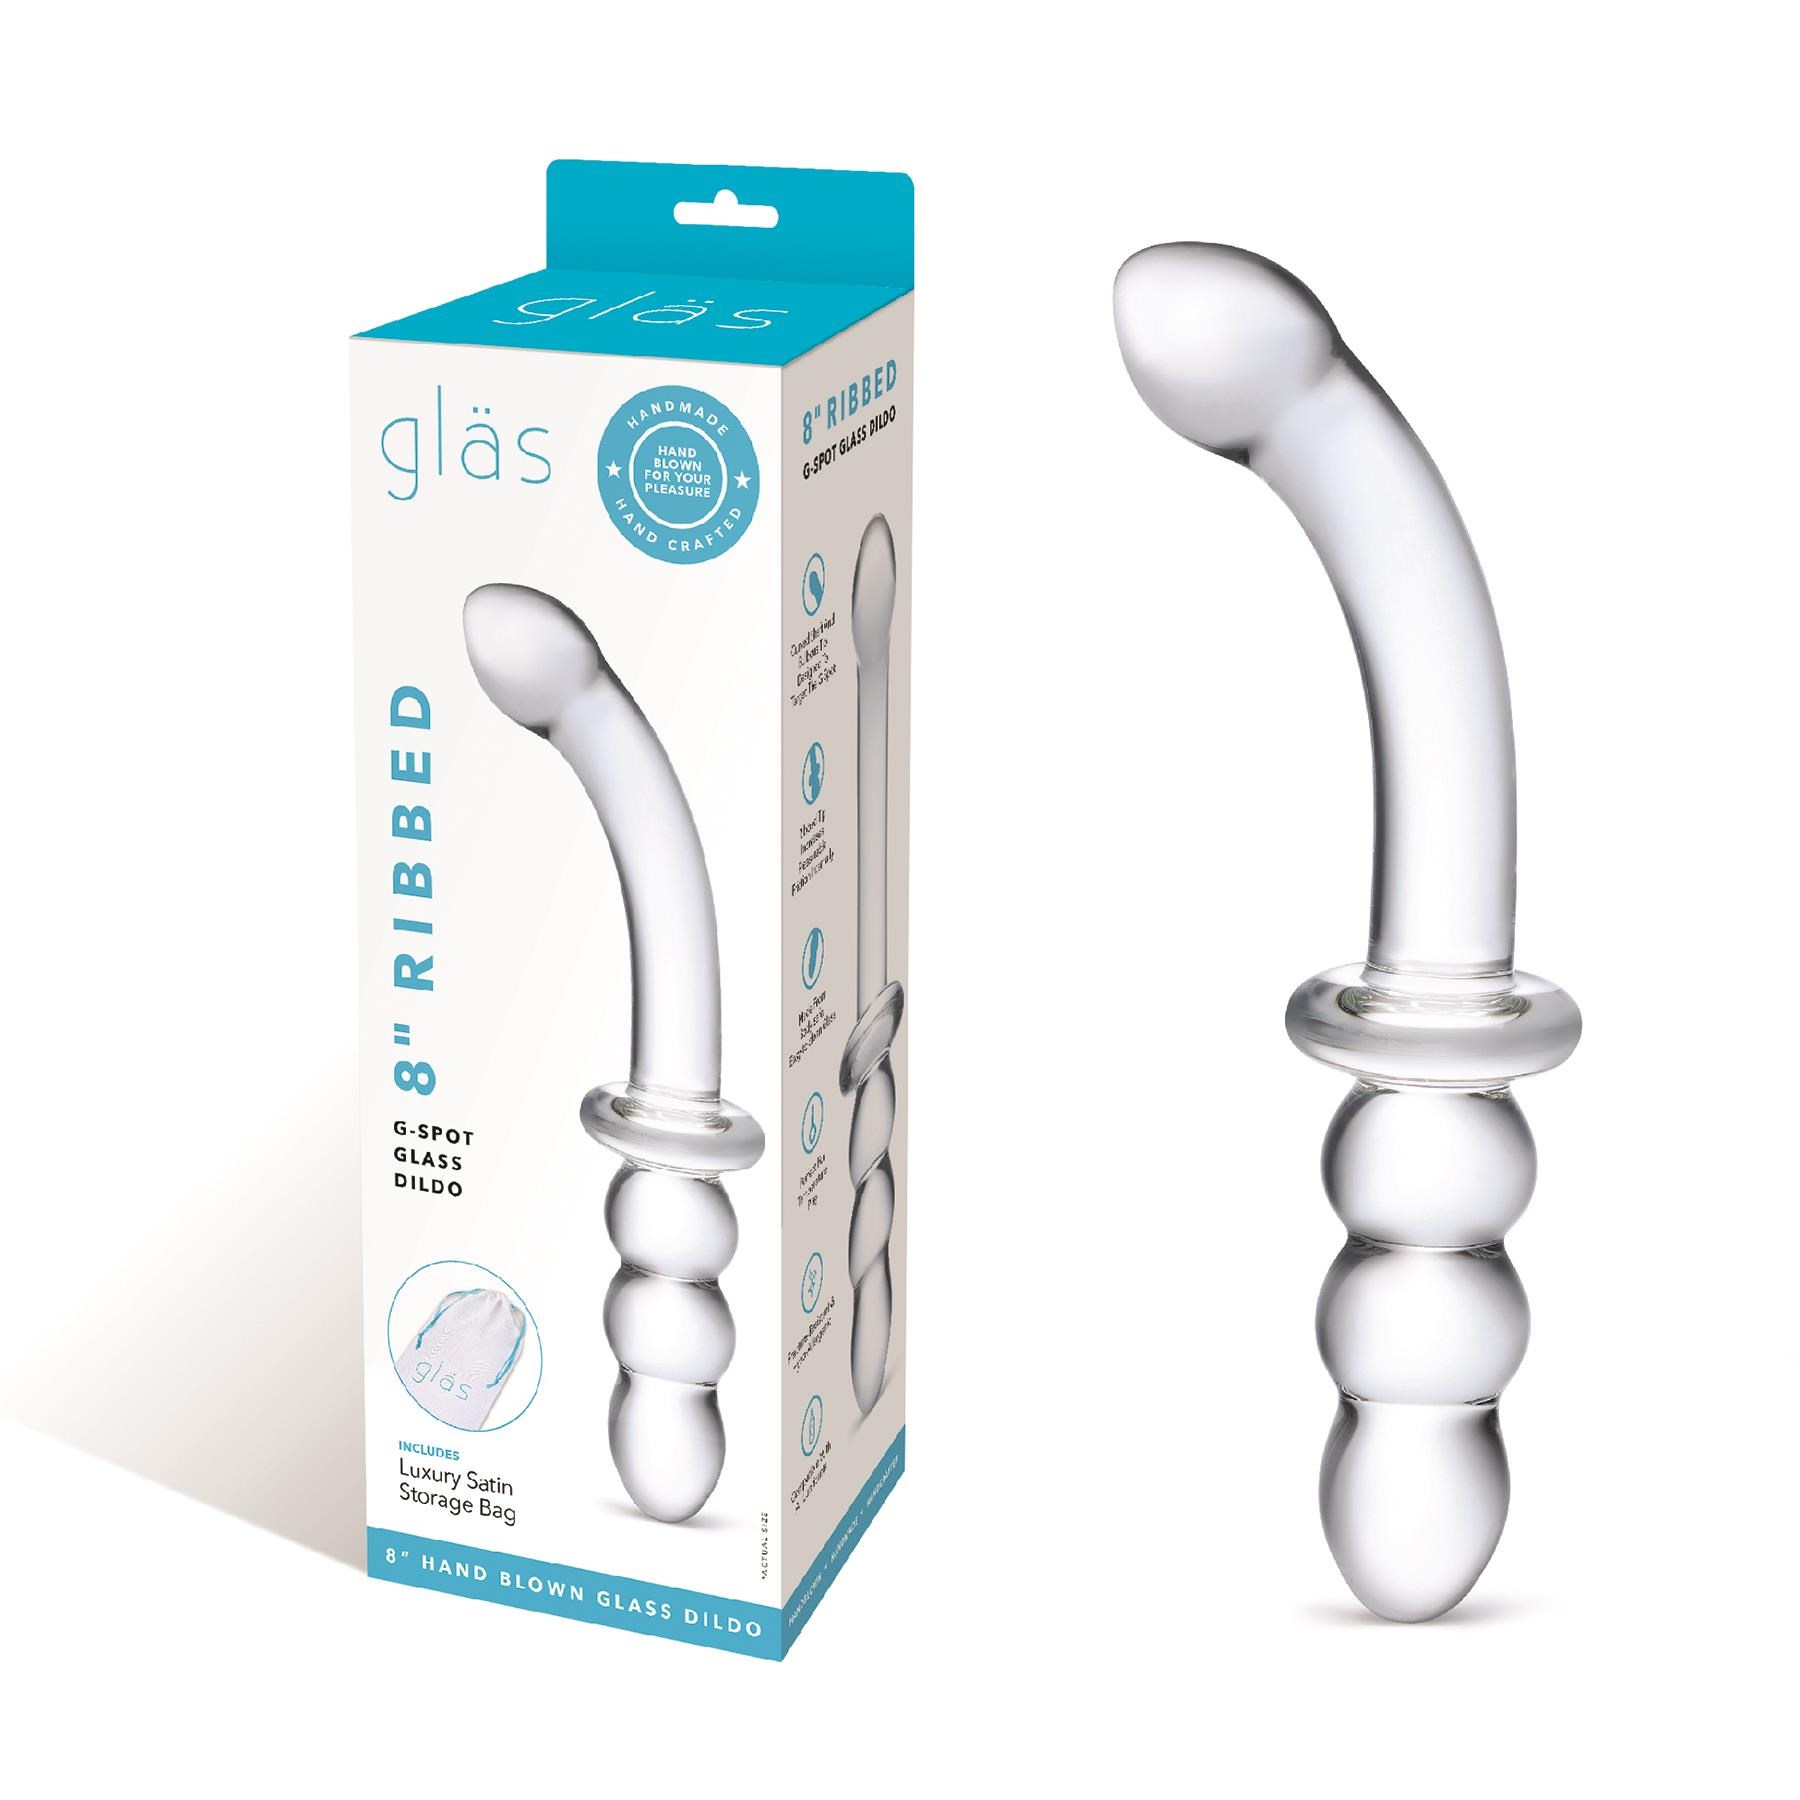 Glas 8 Inch Ribbed G-Spot Glass Dildo	Product and Box Shot